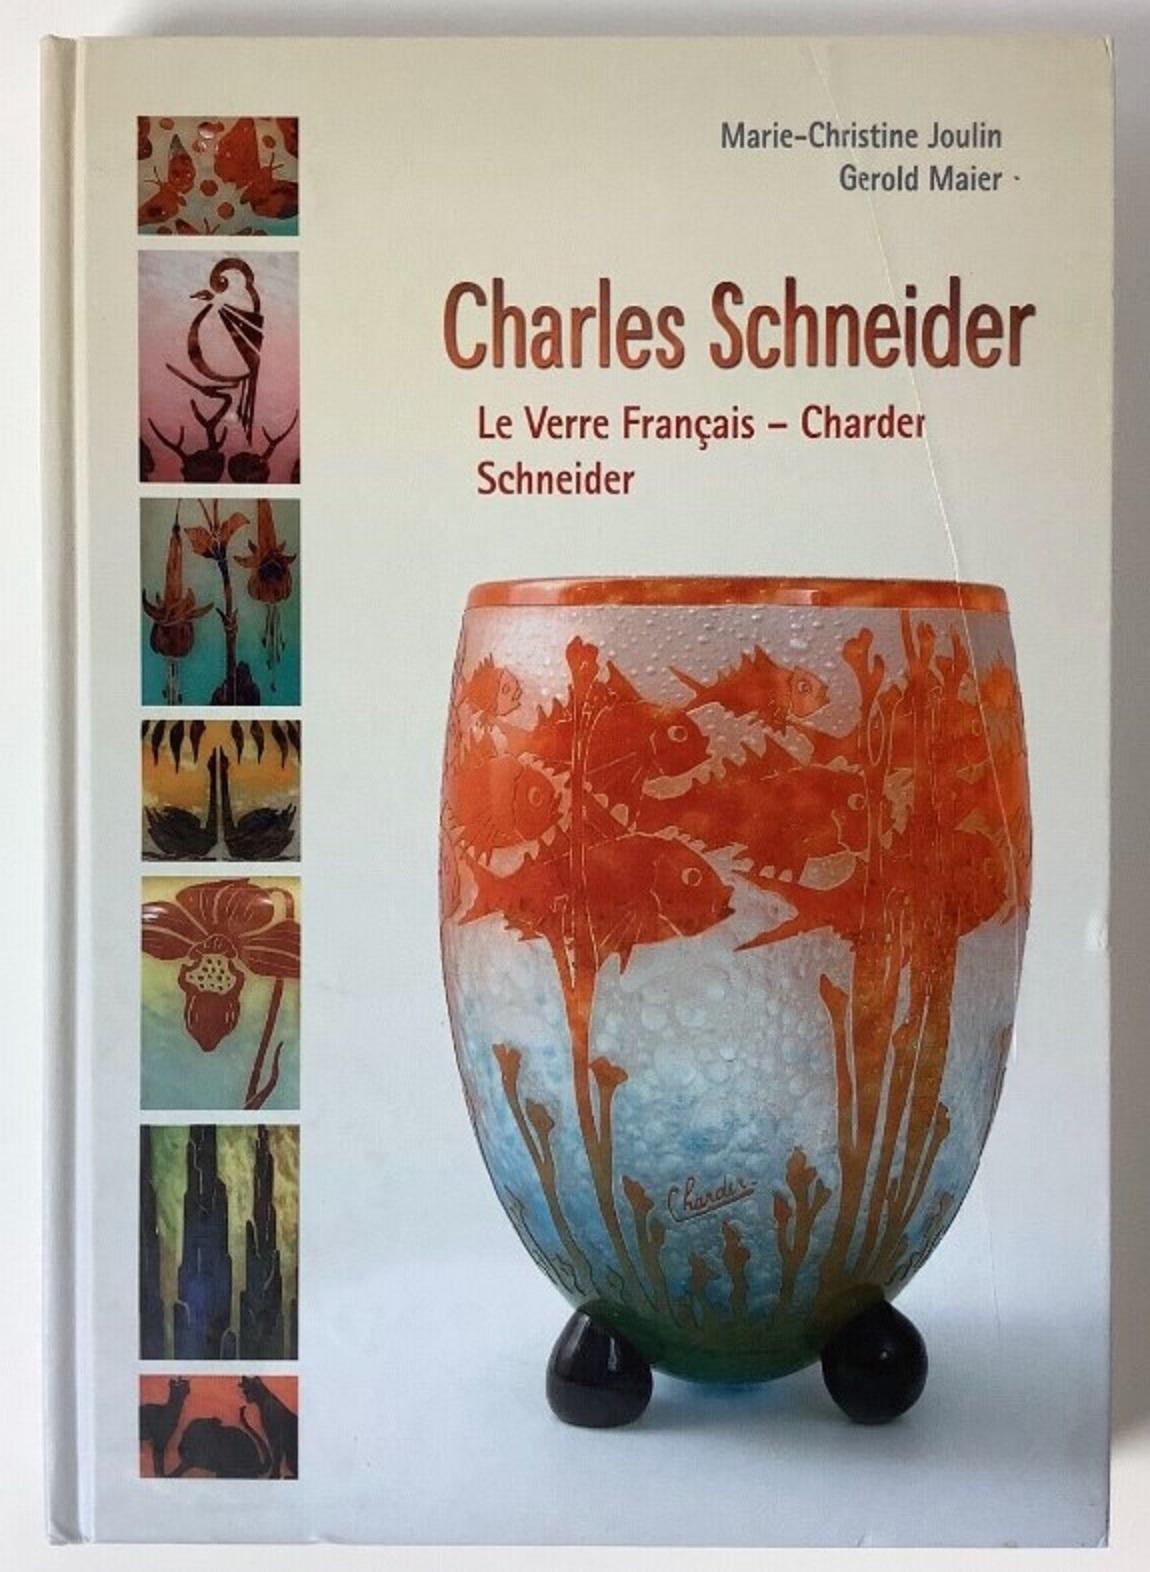 Vase Sign: Le Verre Francais  ( Lavender plant )
Page: 232  book Schneider Maître Verrier
Author: Olivier Ador
acid worked
Le Verre cameo glass was a separate line of art glass designed by Charles Schneider. Its production was made at the same time